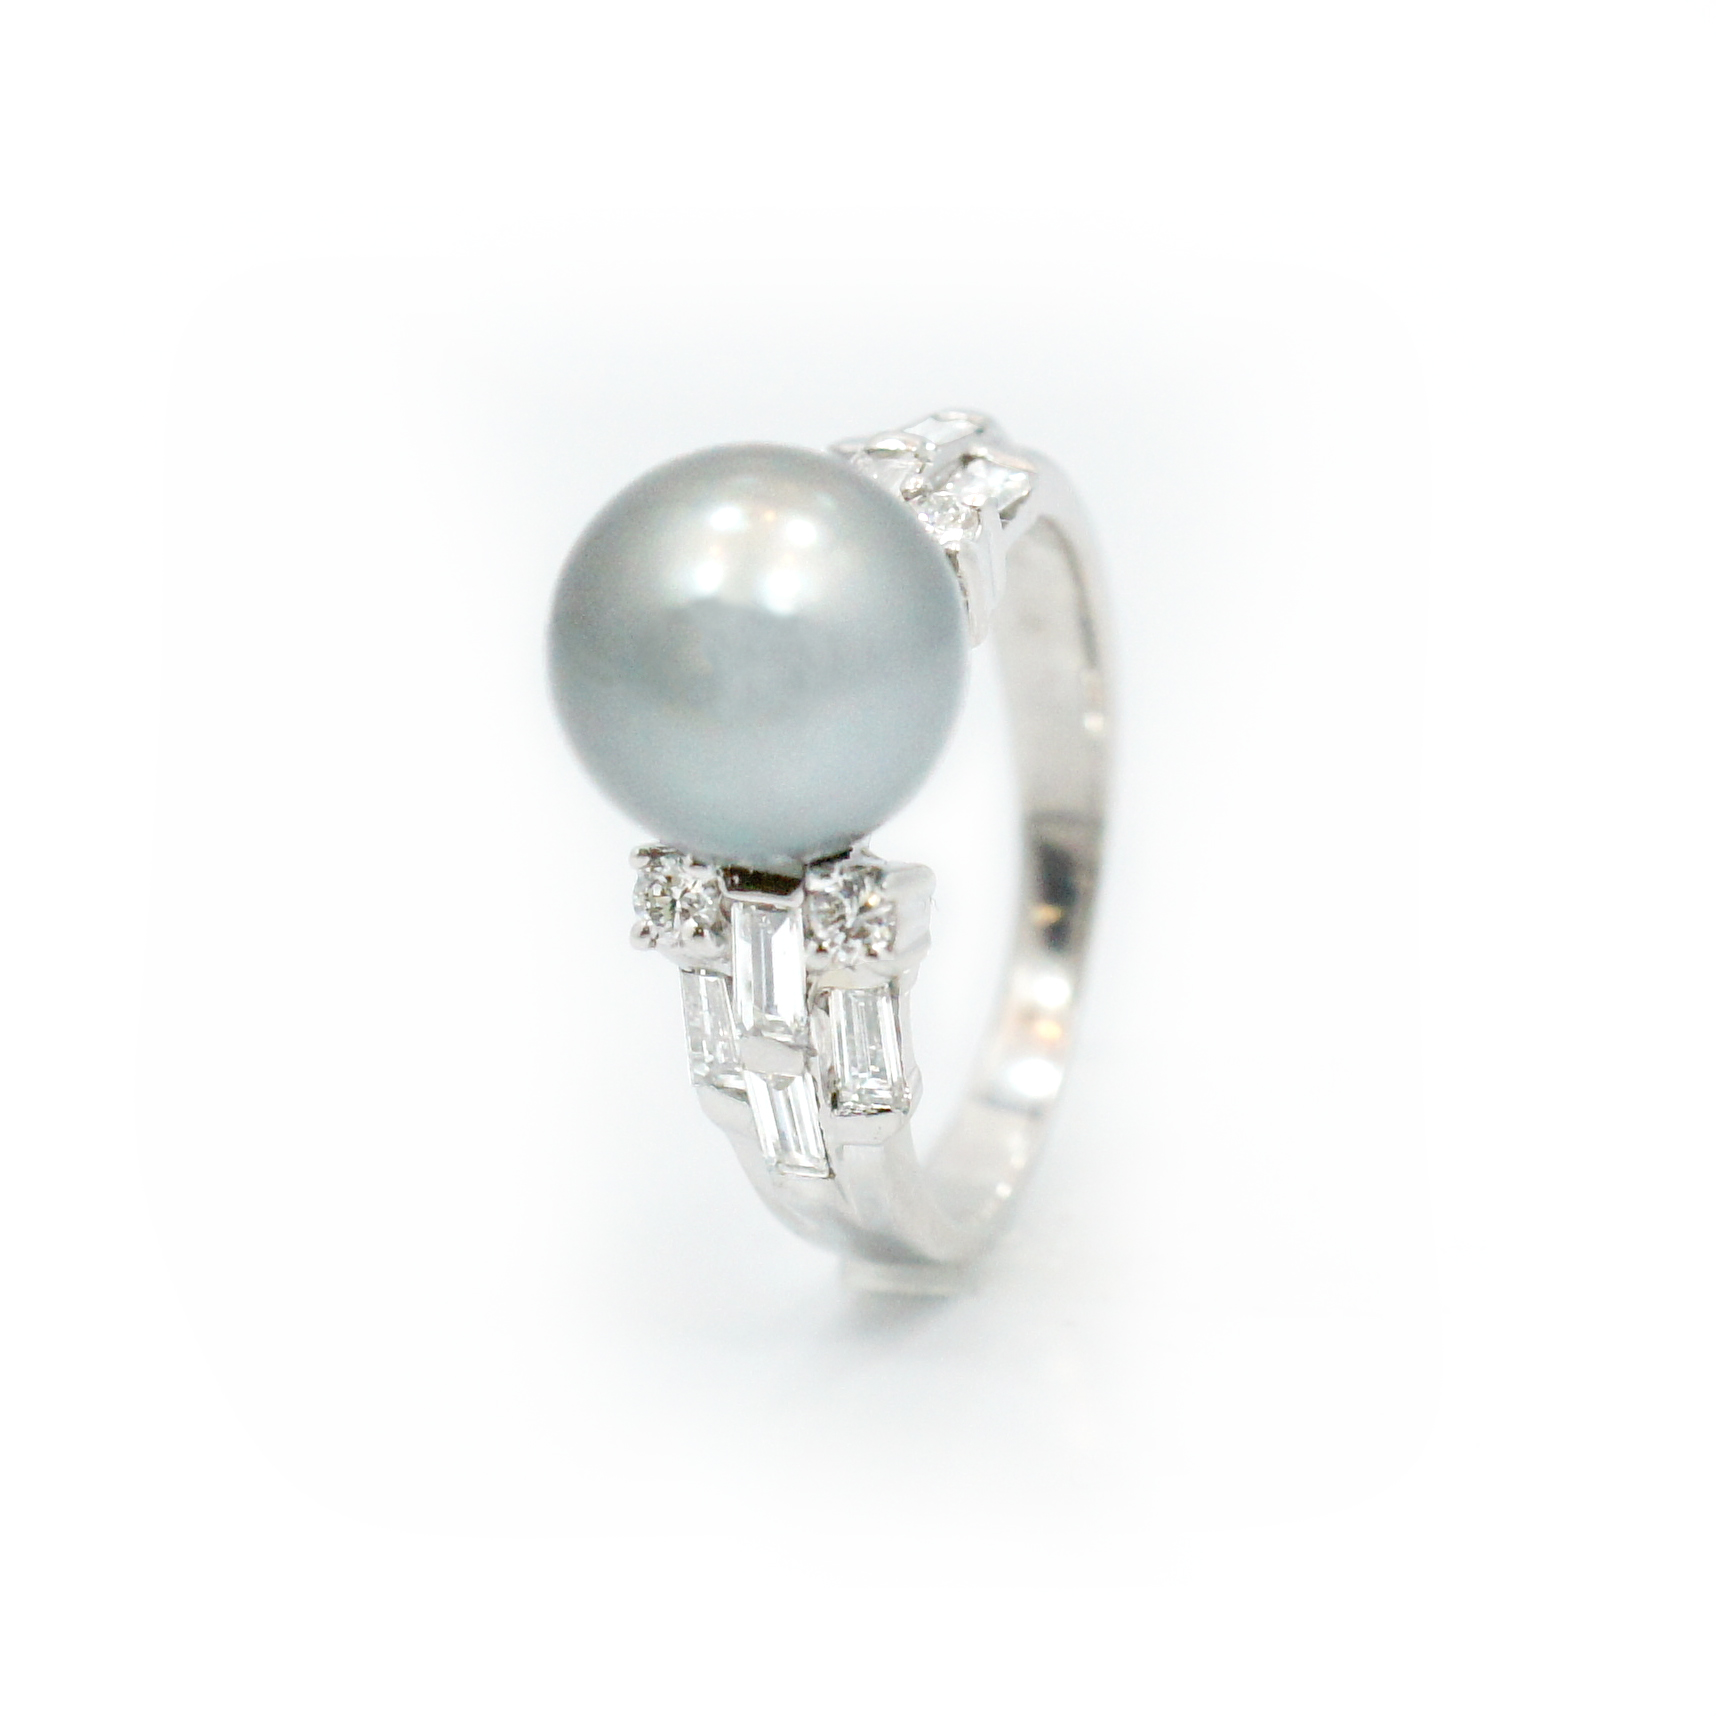 This is a picture of a Tahitian Pearl and Diamond Ring in 18k White Gold